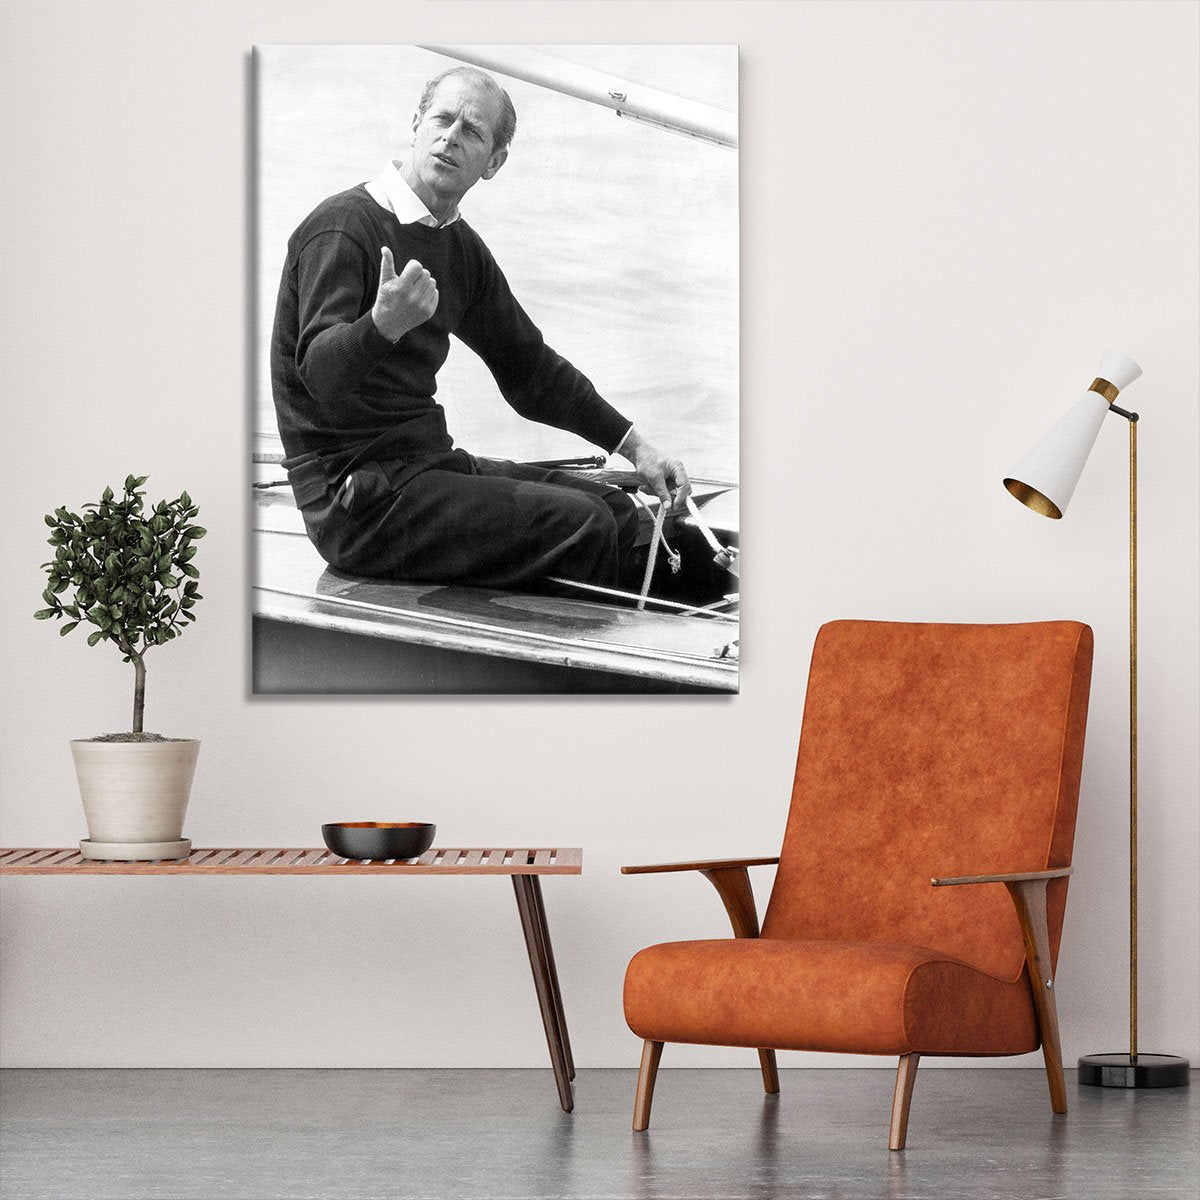 Prince Philip resting after racing at Cowes Isle of Wight Canvas Print or Poster